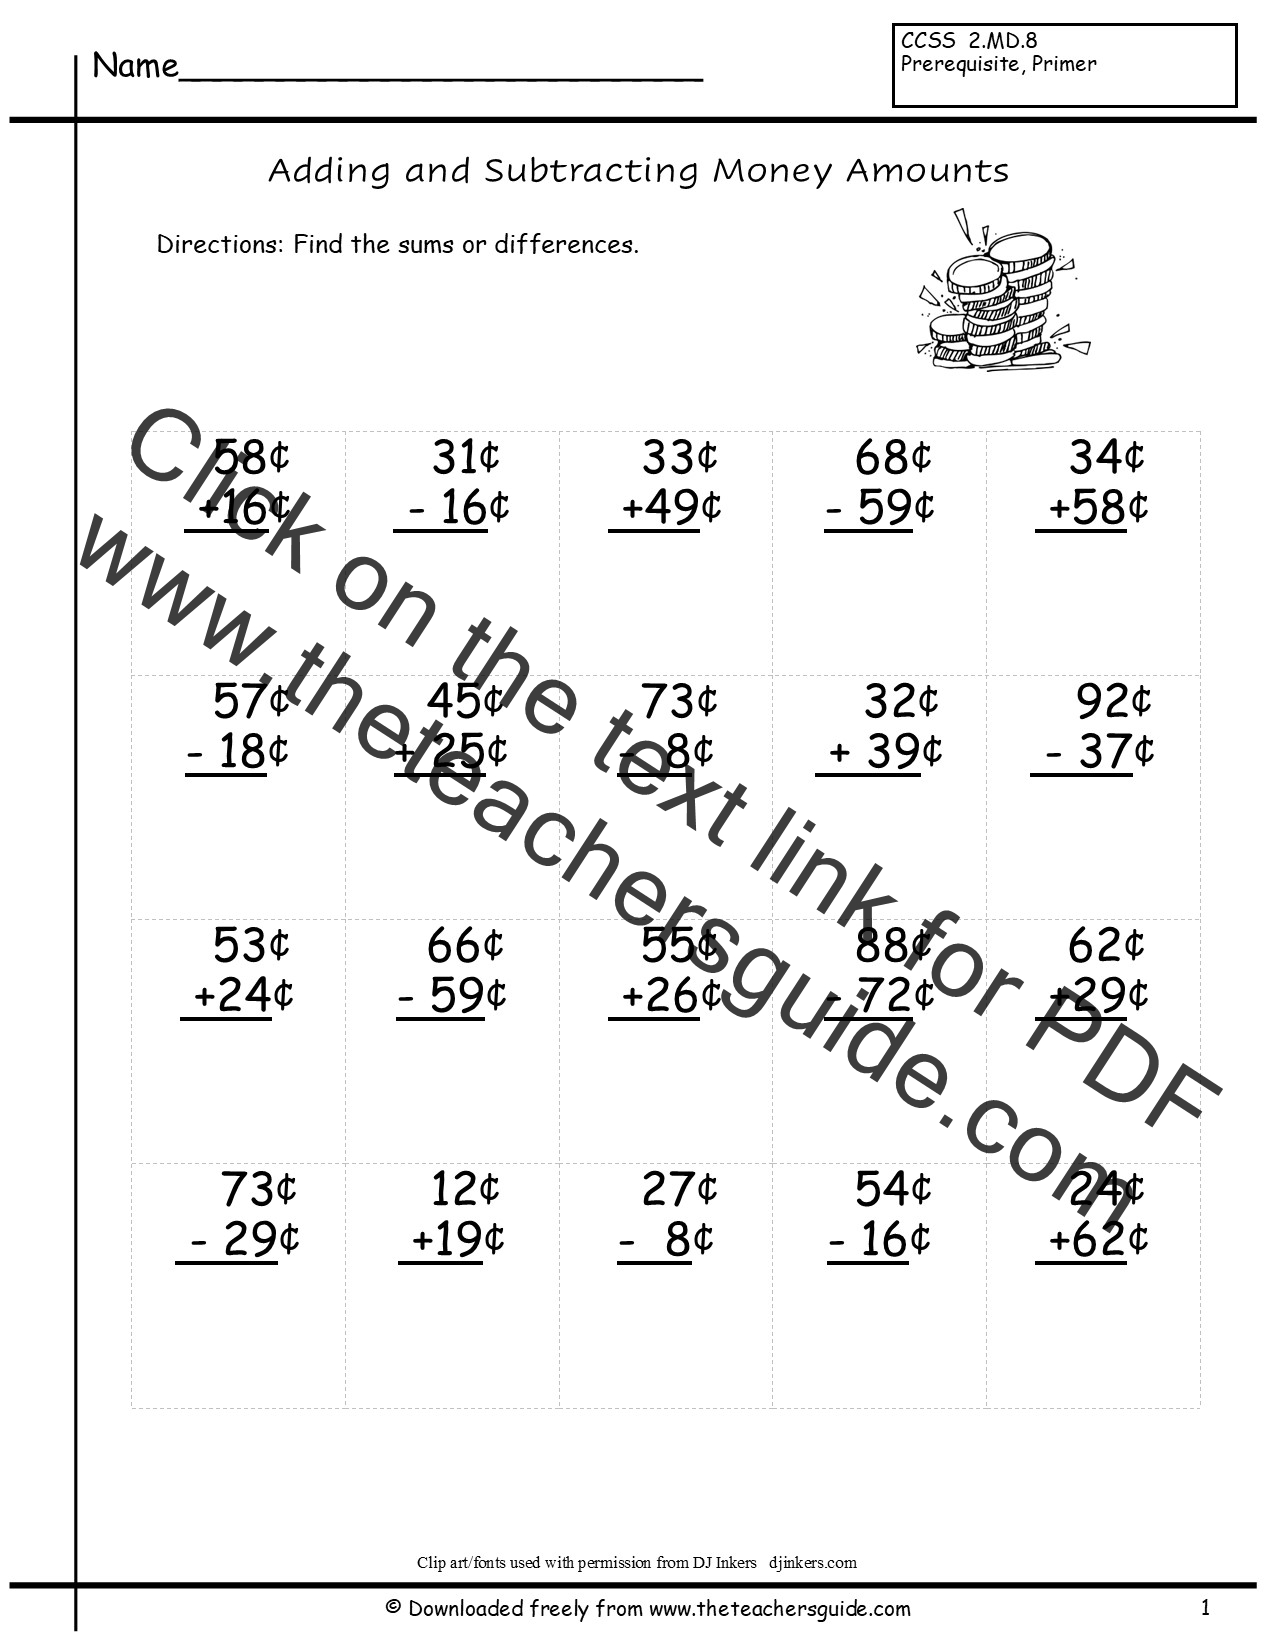 add-and-subtract-money-worksheet